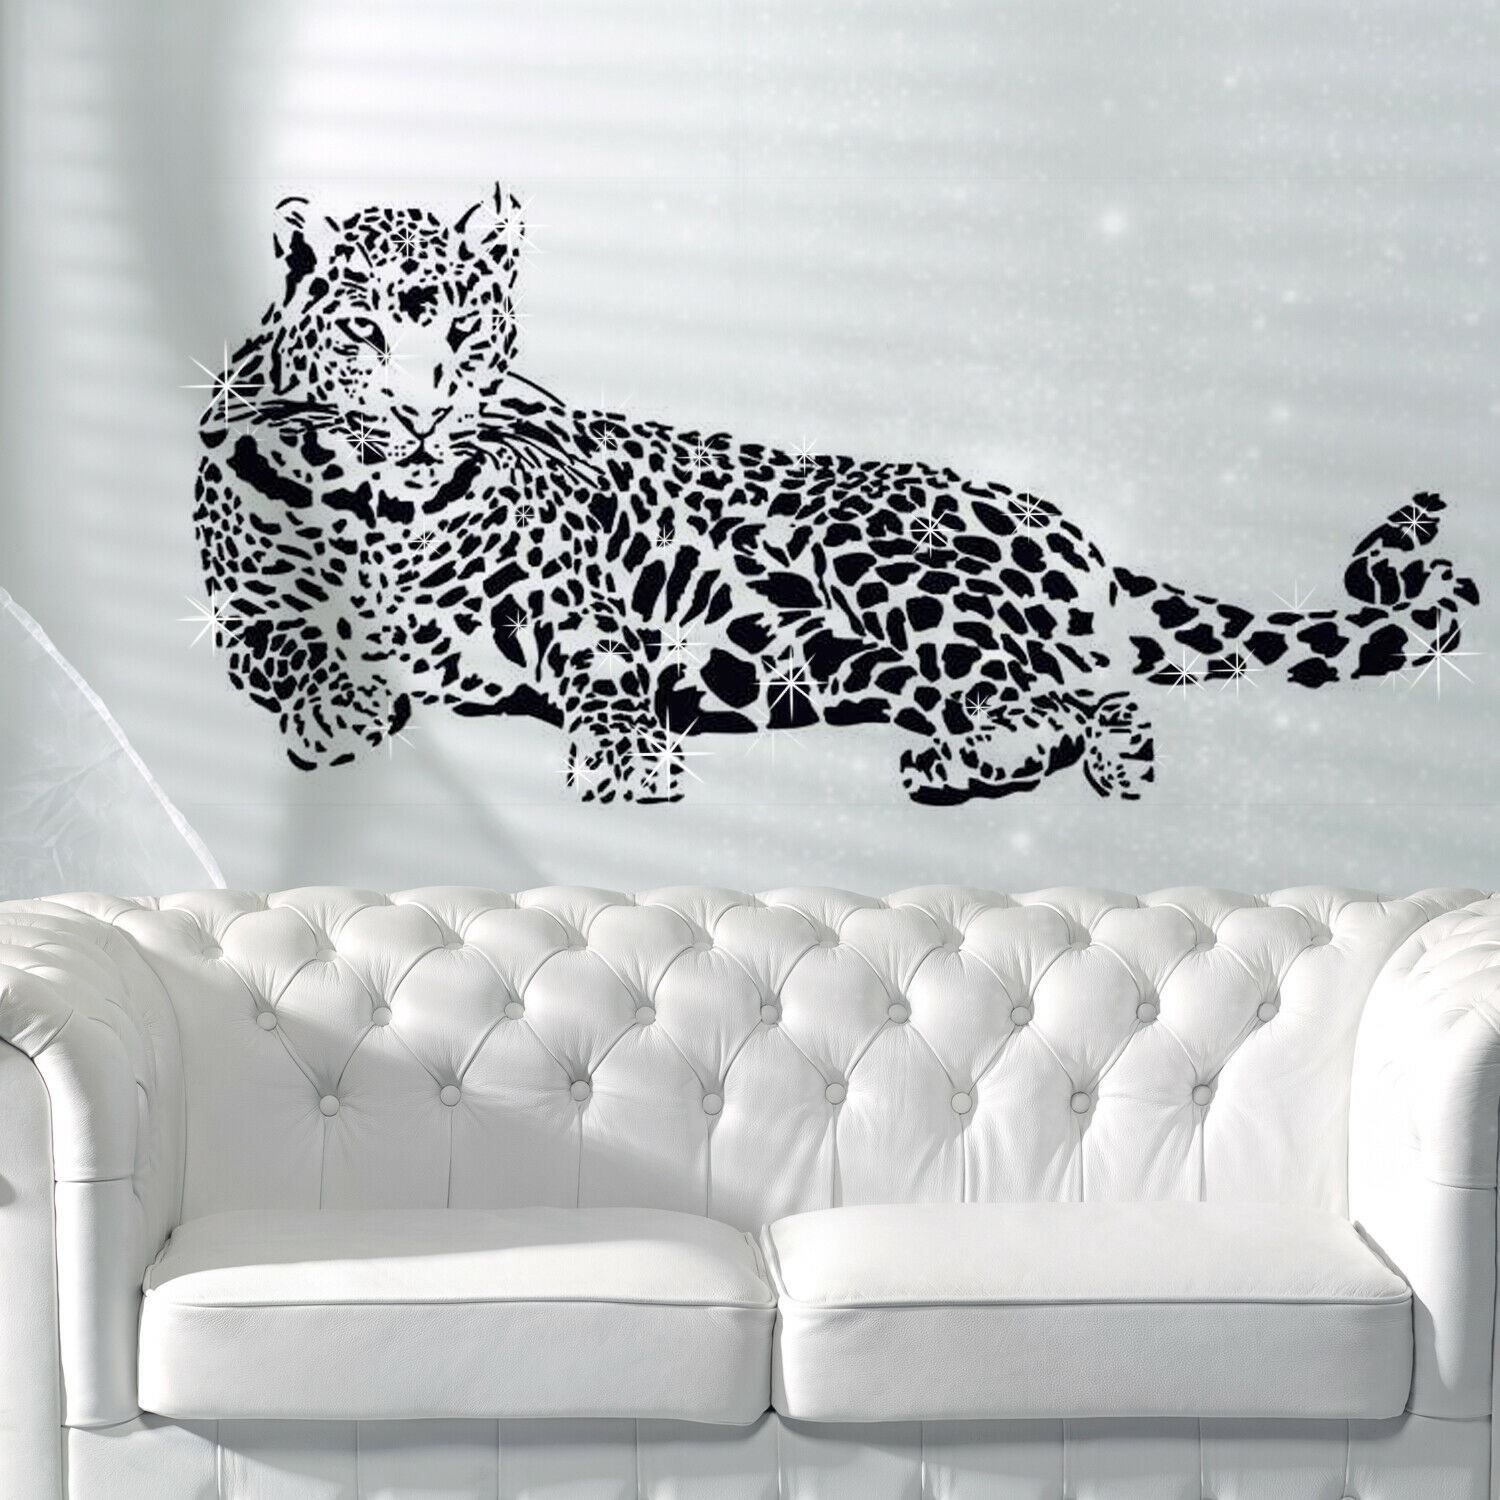 - Transform your room with the stunning Walplus wall sticker collection.
- Walplus' high quality self-adhesive stickers are quick to apply, and can be easily removed and repositioned without damage. 
- Simply peel and stick to any smooth, even surface.
- Application instructions included.
- Eco-friendly materials and Non-toxic.